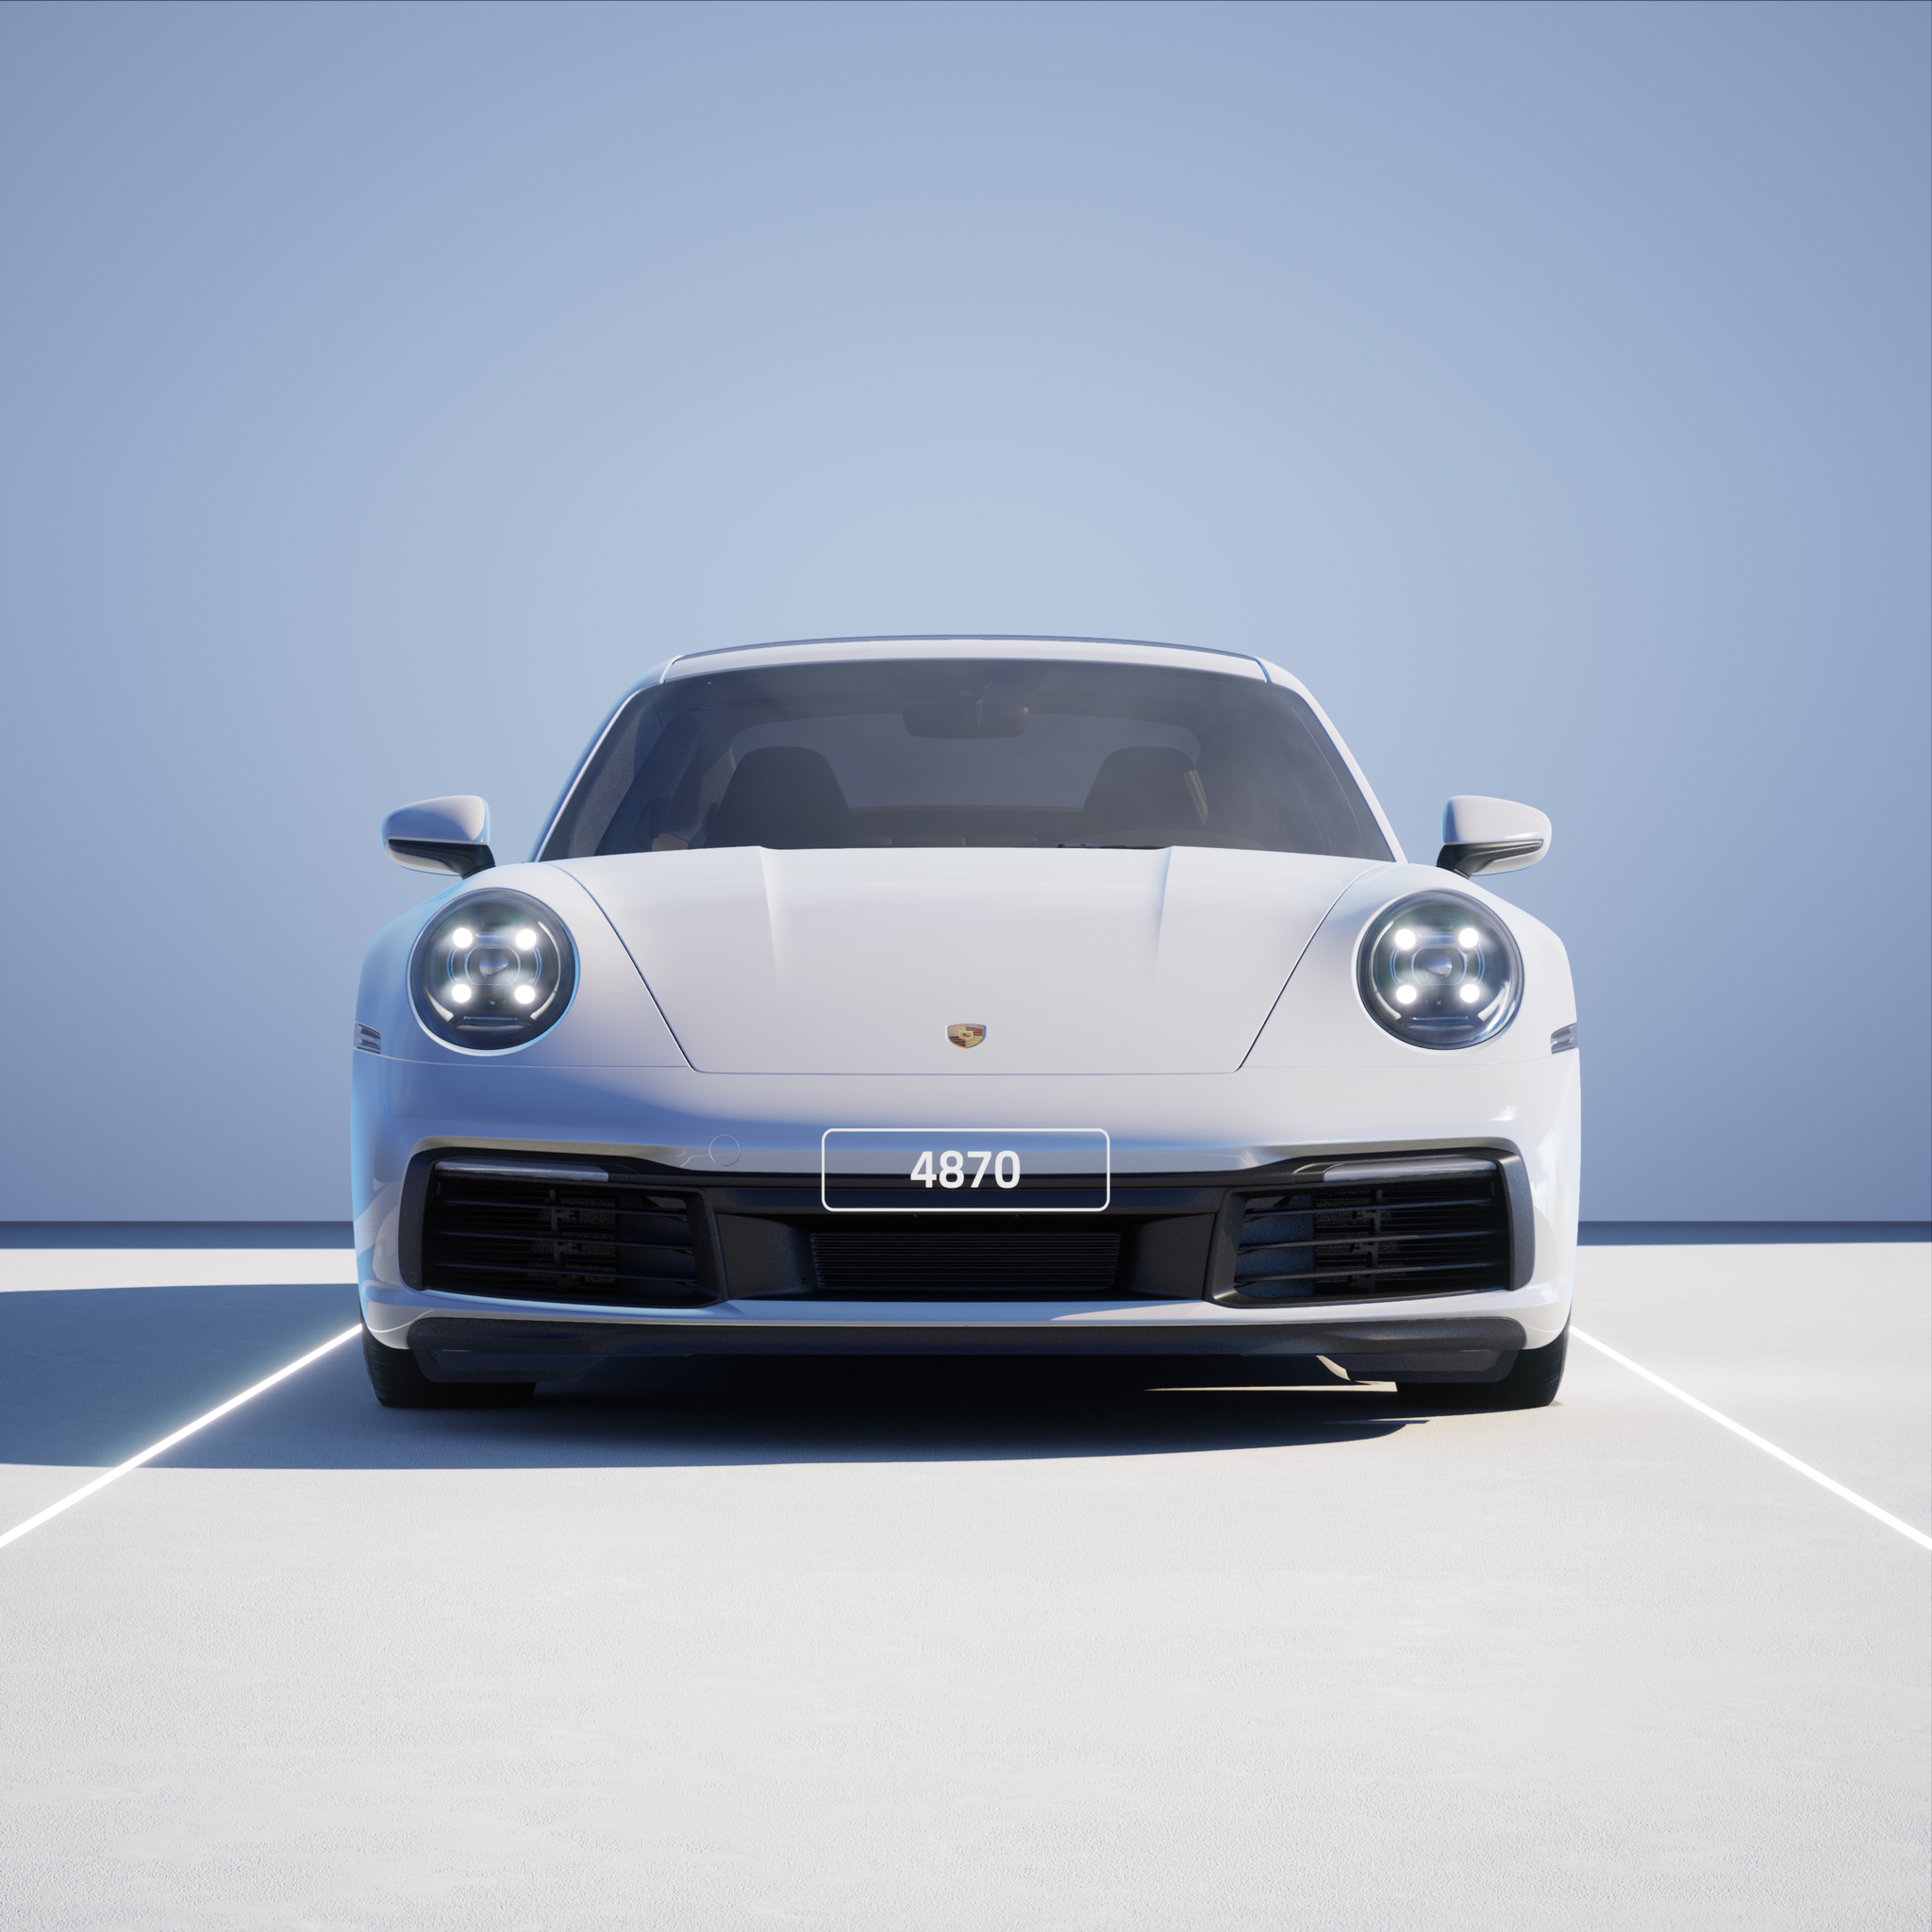 The PORSCHΞ 911 4870 image in phase